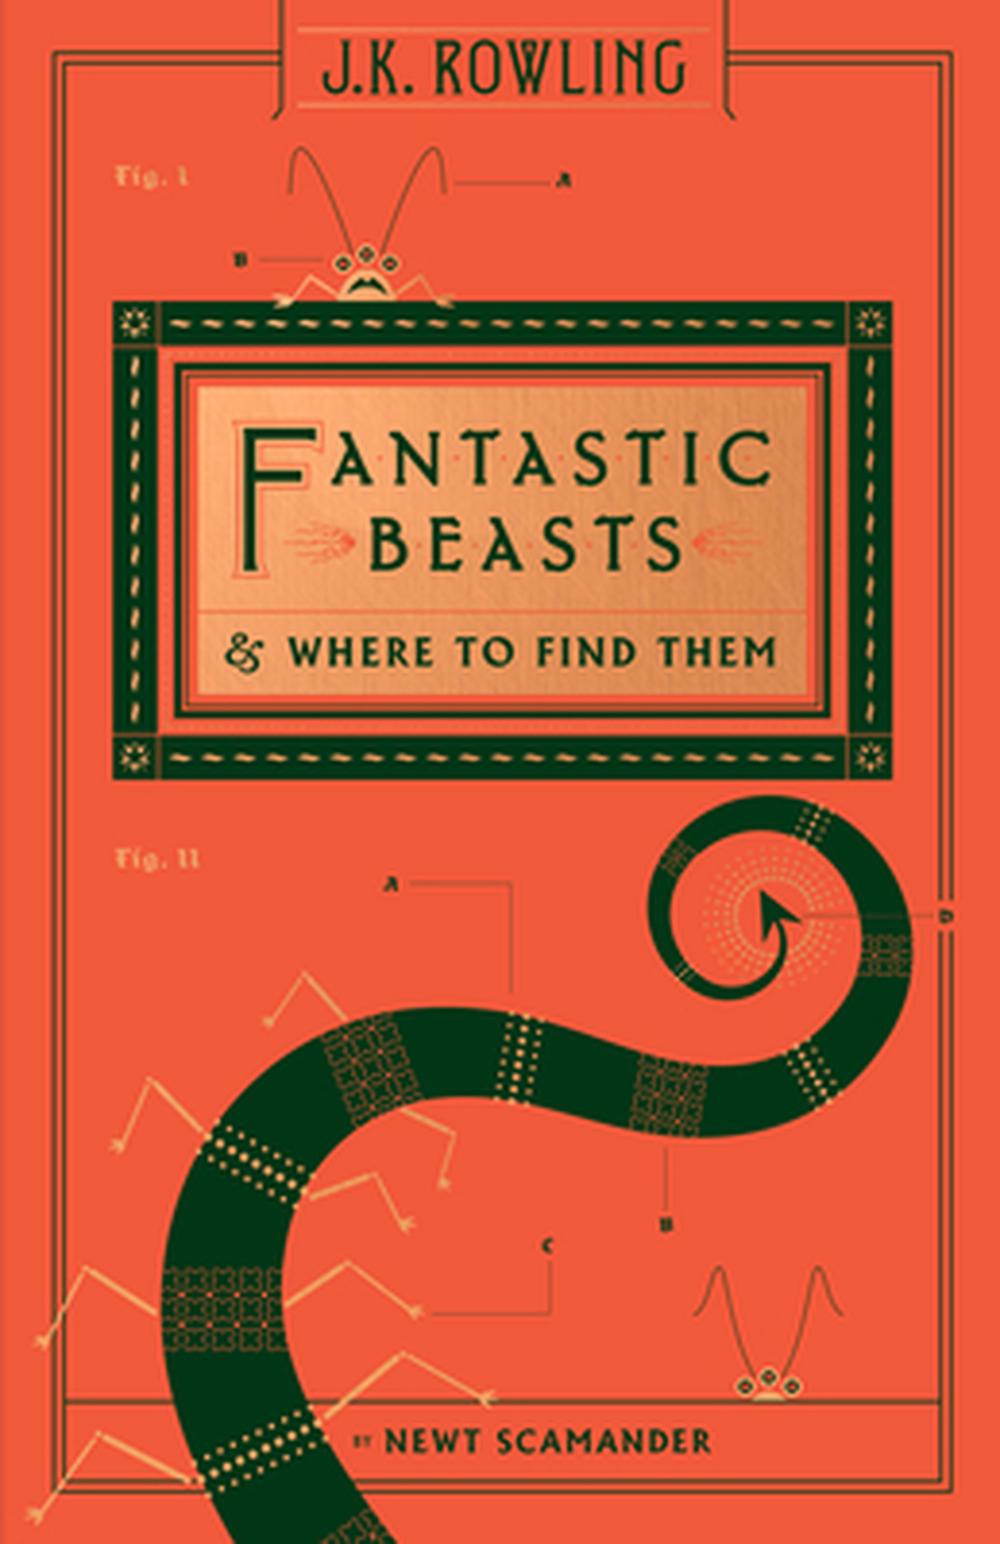 Fantastic Beasts and Where to Find Them download the last version for ipod